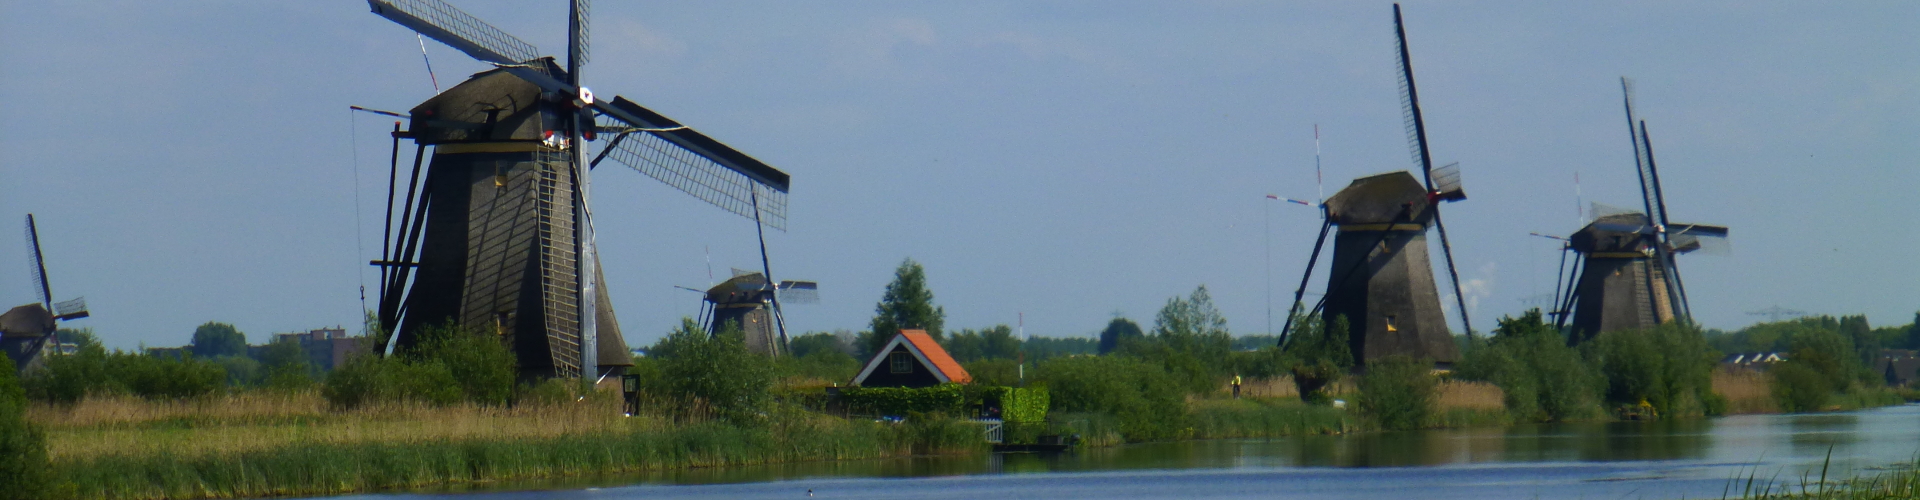 Water pumping windmills in Holland along canal or river